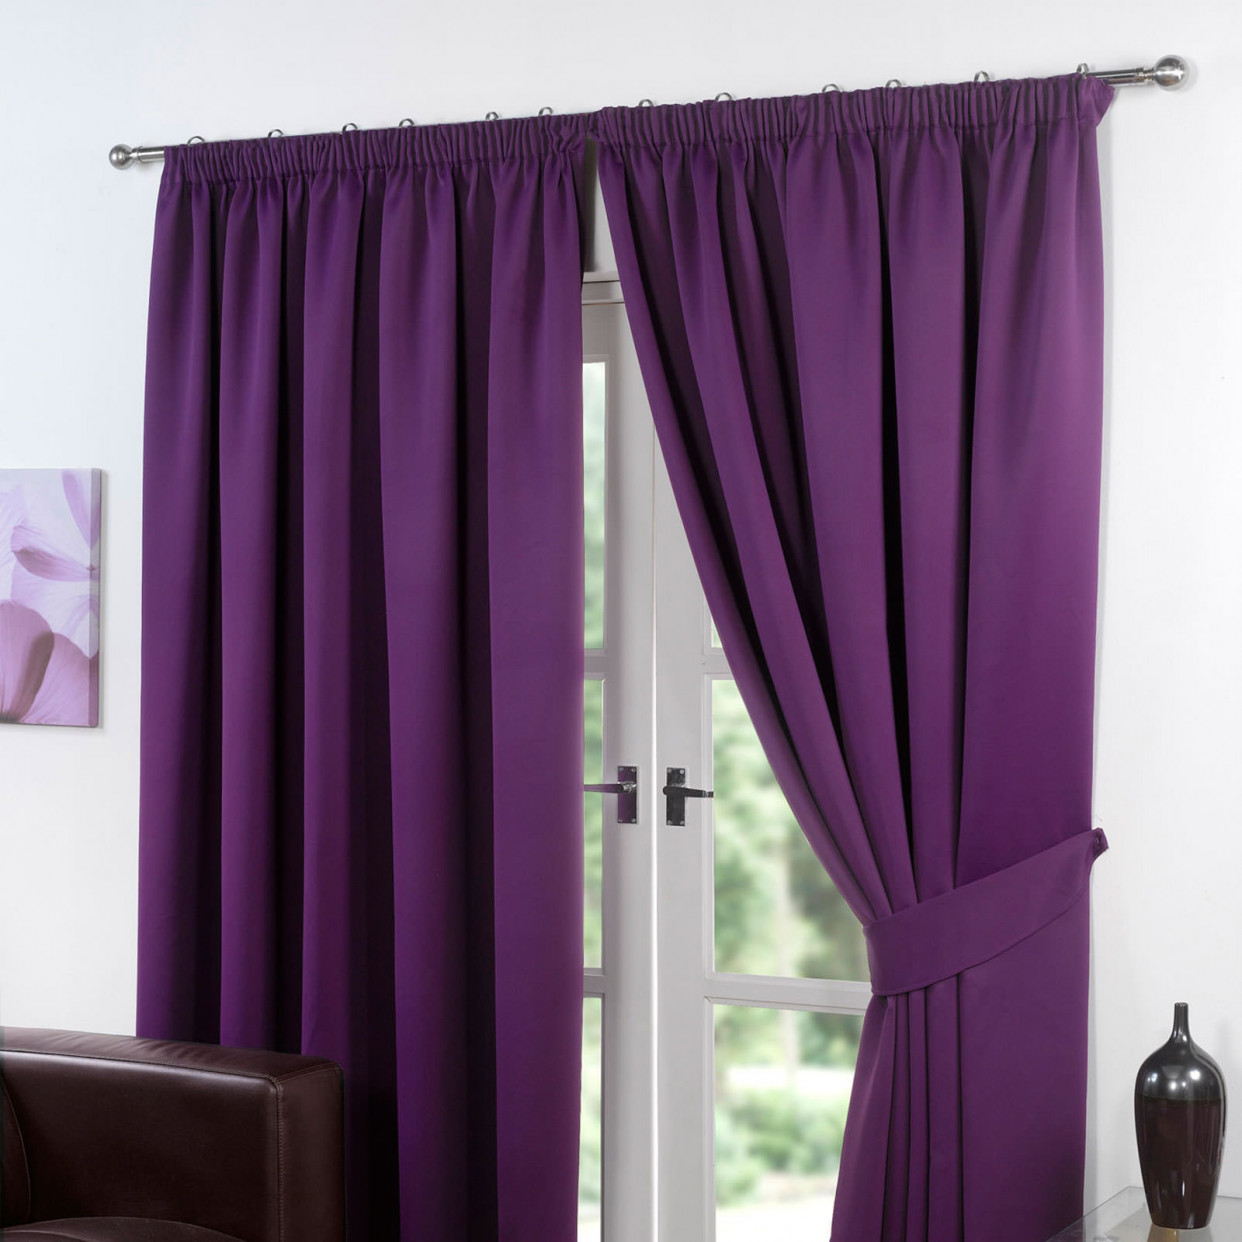 Pencil Pleat Thermal Blackout Fully Lined Curtains - Plum 46x54>